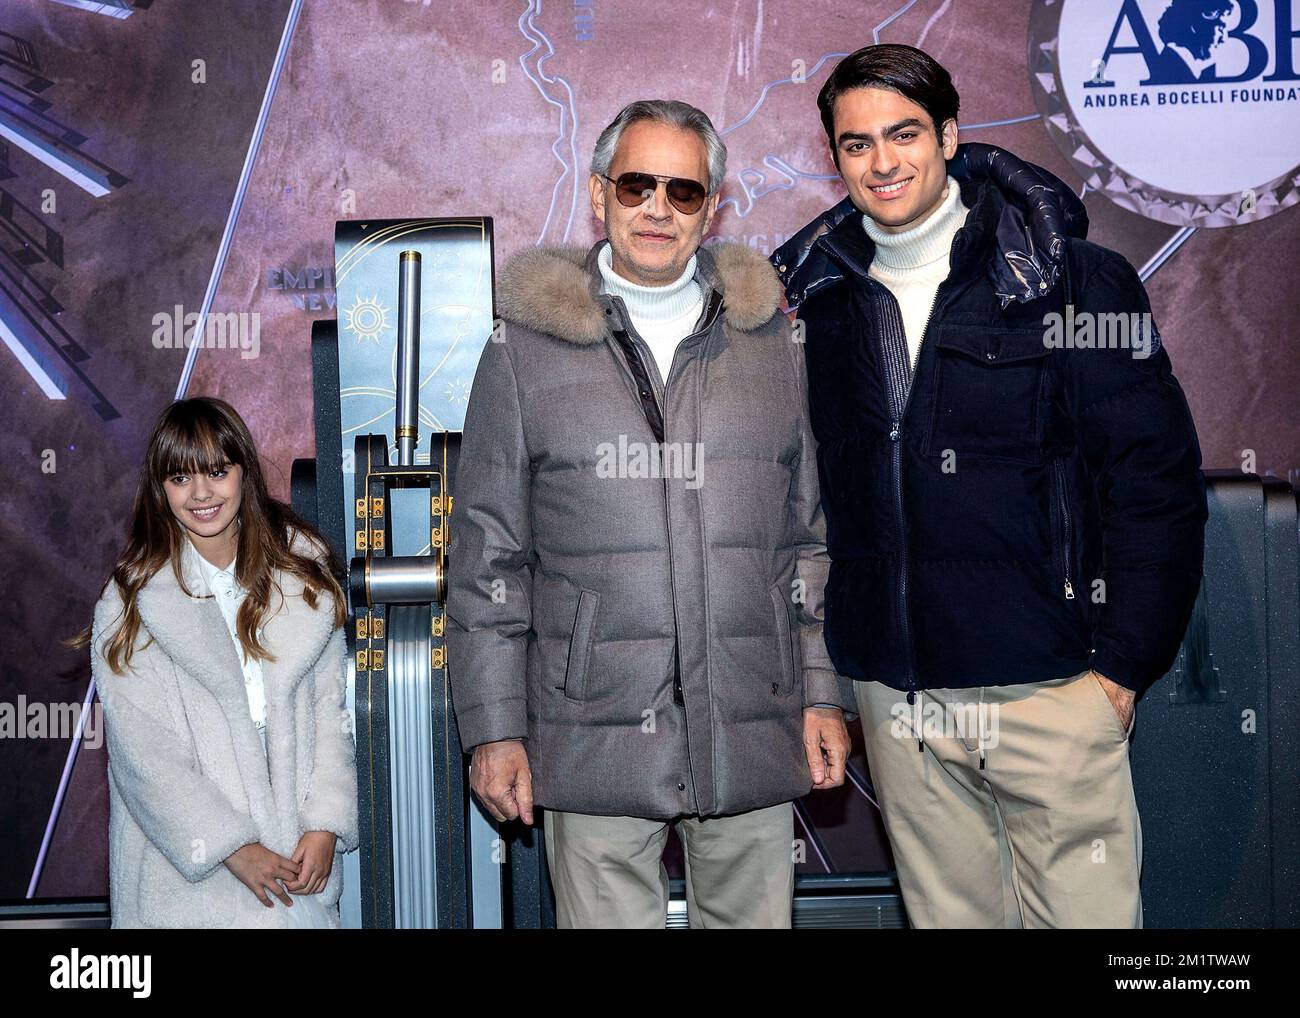 New York, NY, USA. 12 December, 2022. Virginia Bocelli, Andrea Bocelli, Matteo Bocelli at the Celebration of Andrea Bocelli Foundations innovative music education project ABF VOICES OF at The Empire State Building. Credit: Steve Mack/Alamy Stock Photo